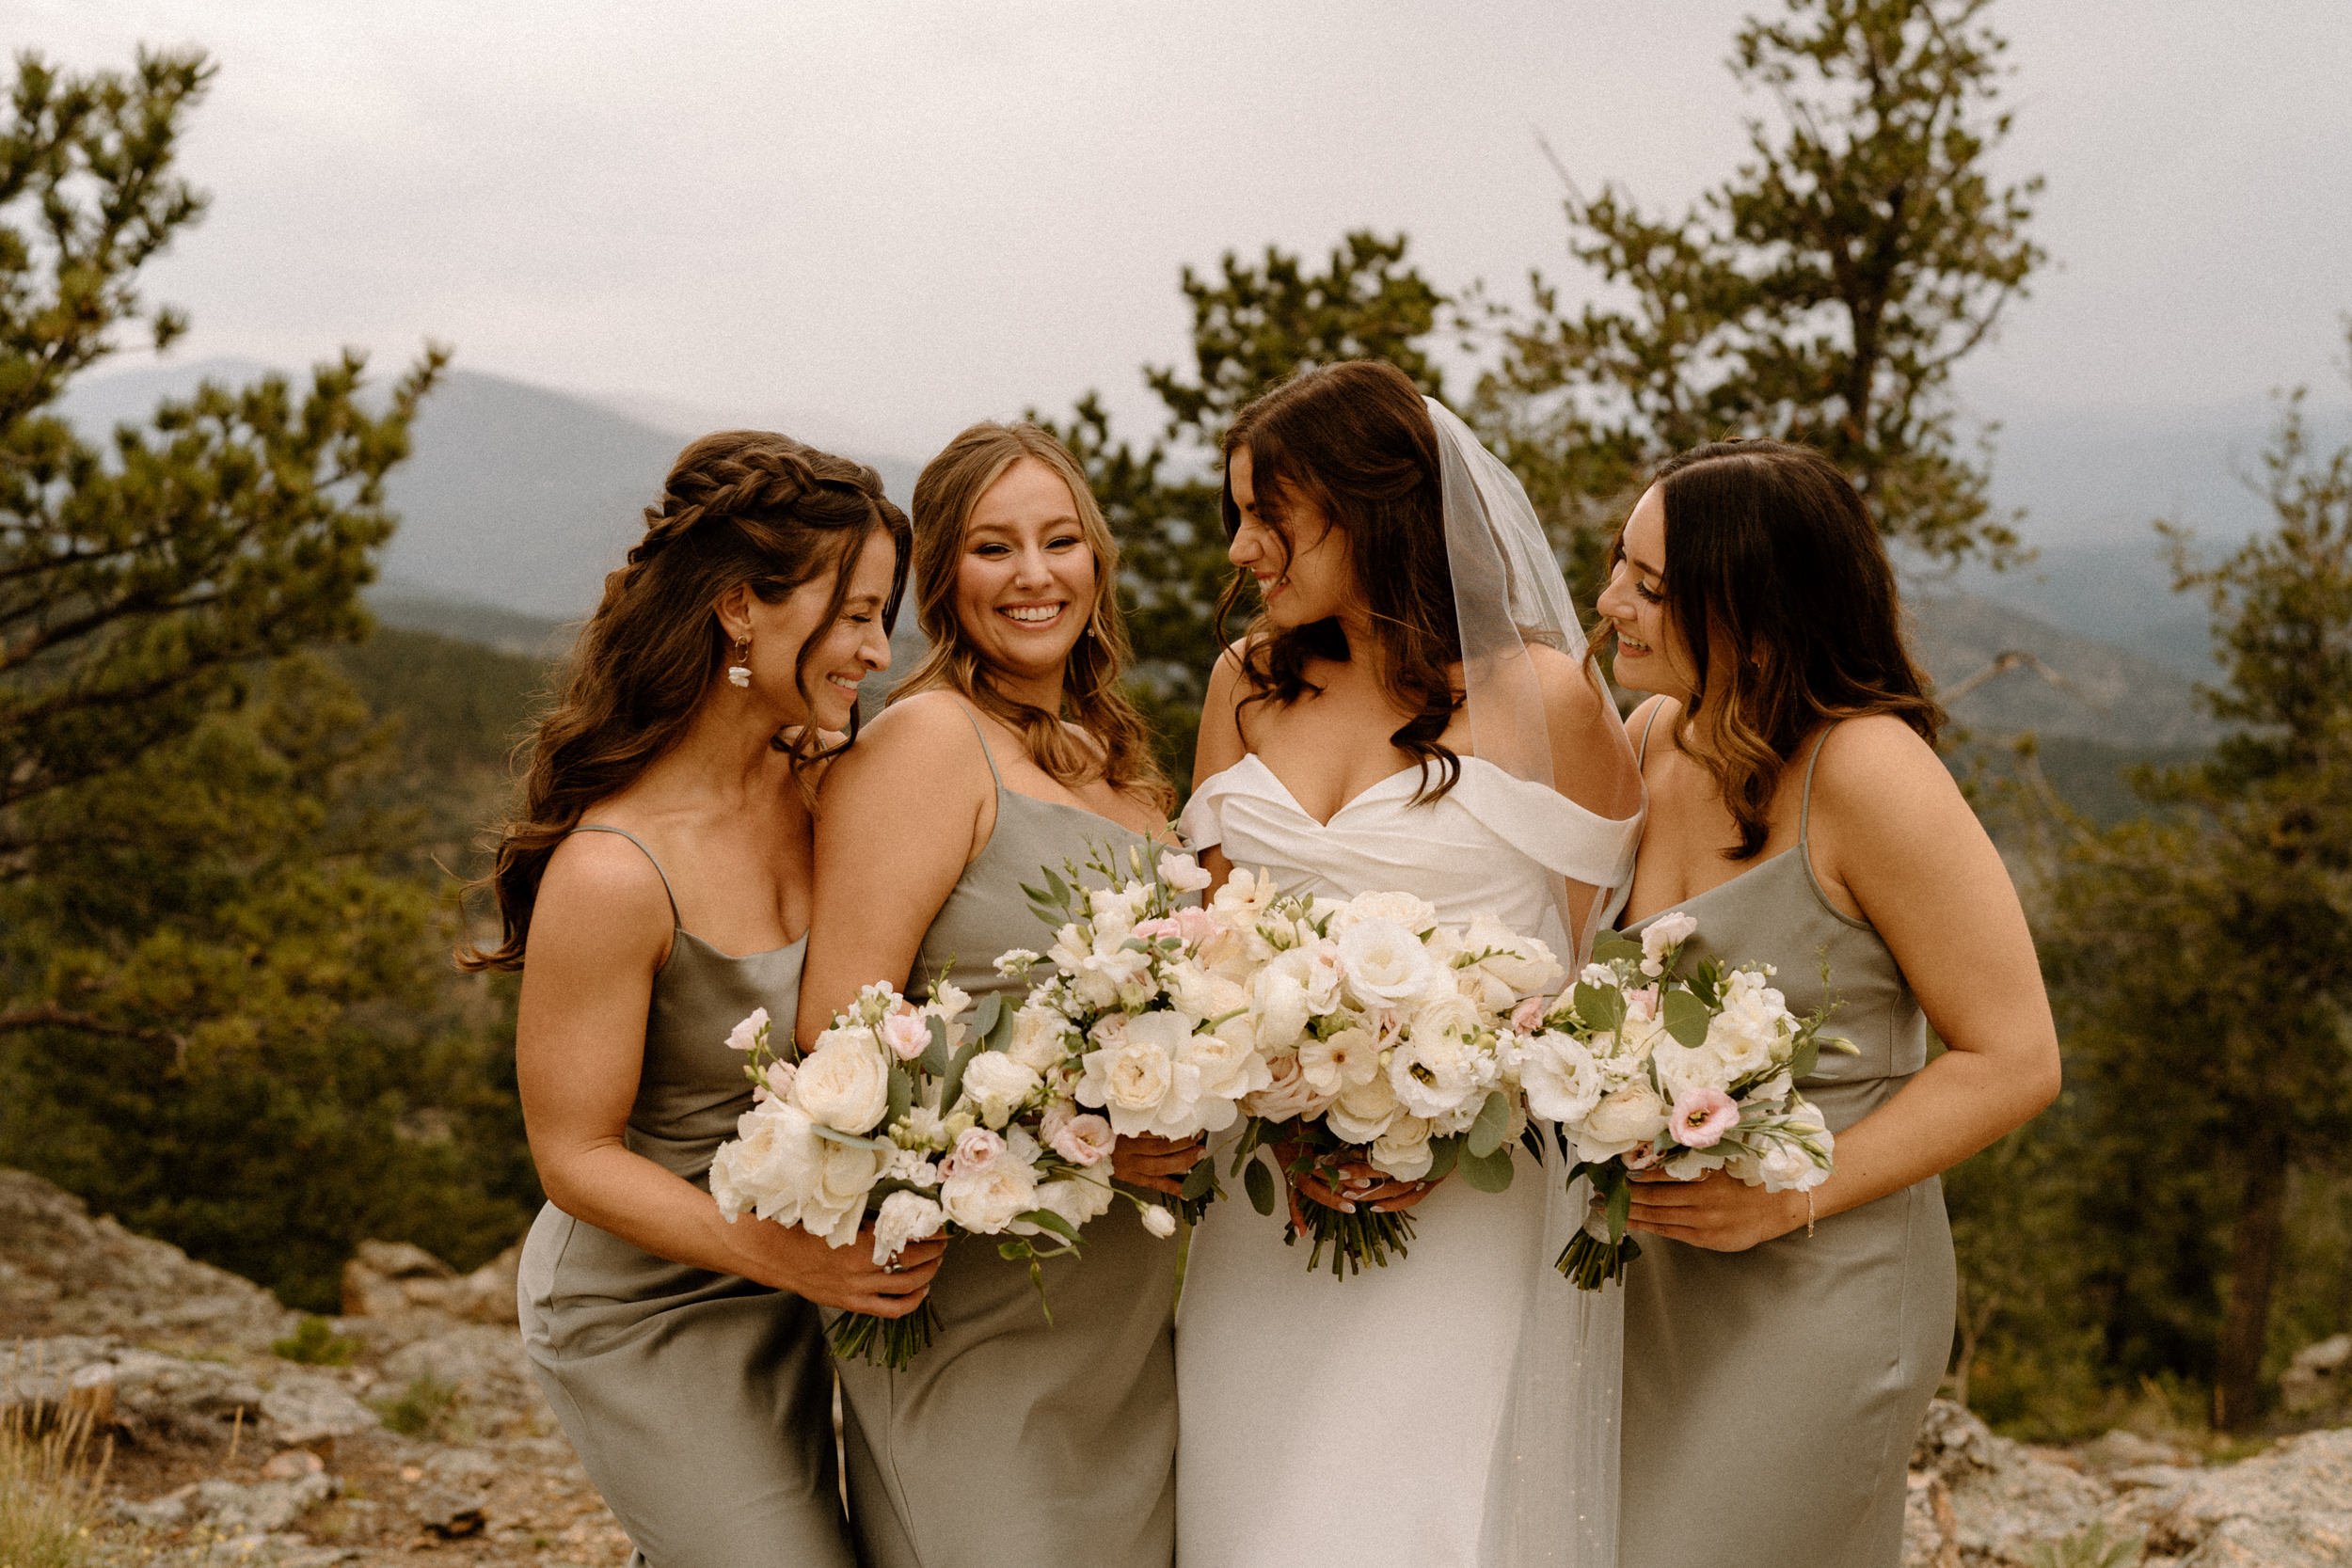 The bride laughs with her bridesmaids